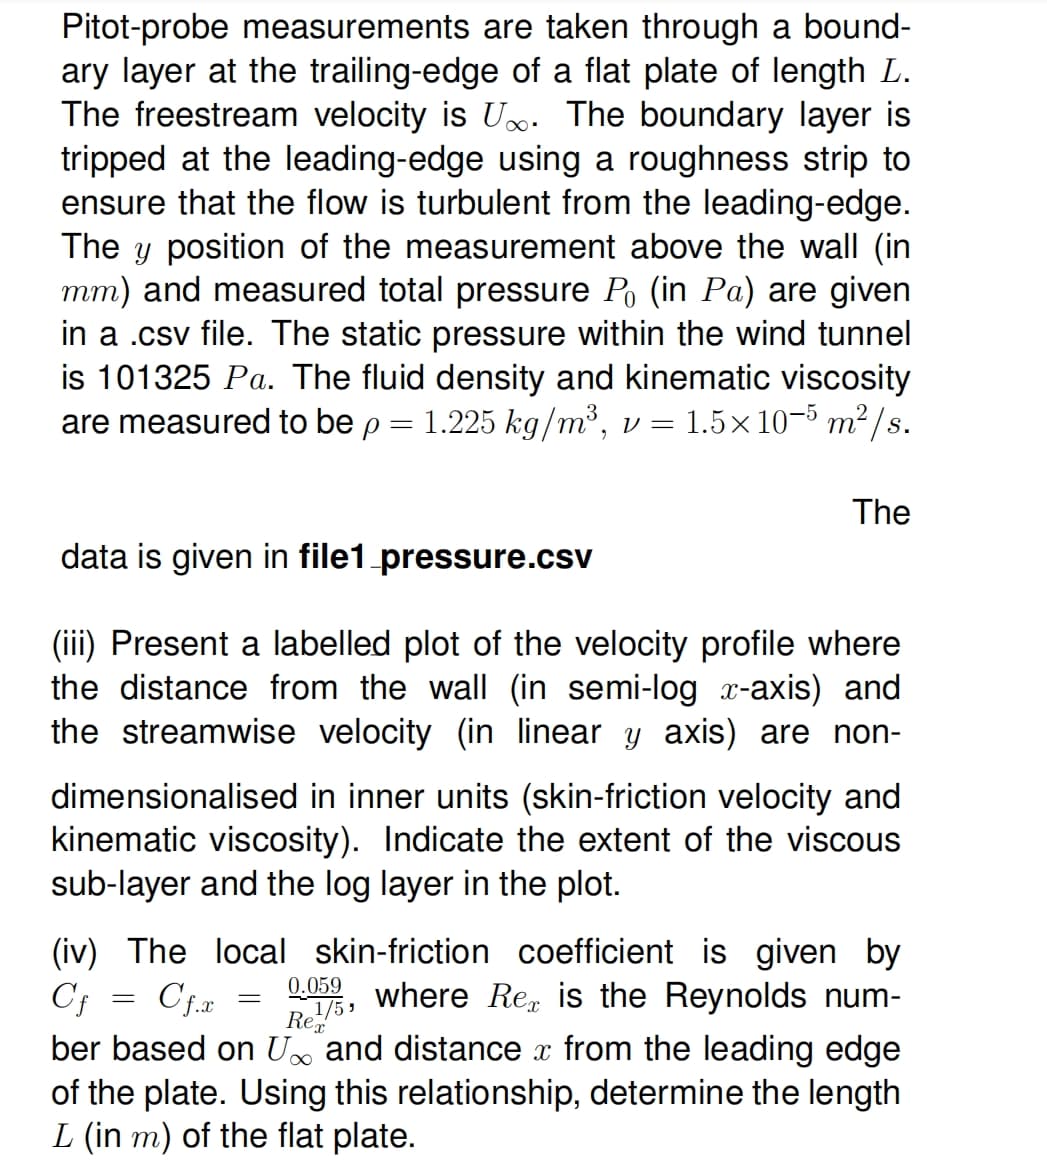 Pitot-probe measurements are taken through a bound-
ary layer at the trailing-edge of a flat plate of length L.
The freestream velocity is U. The boundary layer is
tripped at the leading-edge using a roughness strip to
ensure that the flow is turbulent from the leading-edge.
The y position of the measurement above the wall (in
mm) and measured total pressure Po (in Pa) are given
in a .csv file. The static pressure within the wind tunnel
is 101325 Pa. The fluid density and kinematic viscosity
are measured to be p = 1.225 kg/m³, v = 1.5×10−5 m²/s.
data is given in file1 pressure.csv
(iii) Present a labelled plot of the velocity profile where
the distance from the wall (in semi-log x-axis) and
the streamwise velocity (in linear y axis) are non-
dimensionalised in inner units (skin-friction velocity and
kinematic viscosity). Indicate the extent of the viscous
sub-layer and the log layer in the plot.
(iv) The local skin-friction coefficient is given by
Cf
where Re is the Reynolds num-
Cf.x
=
=
The
0.059
1/5,
Rex
∞
ber based on U and distance from the leading edge
of the plate. Using this relationship, determine the length
L (in m) of the flat plate.